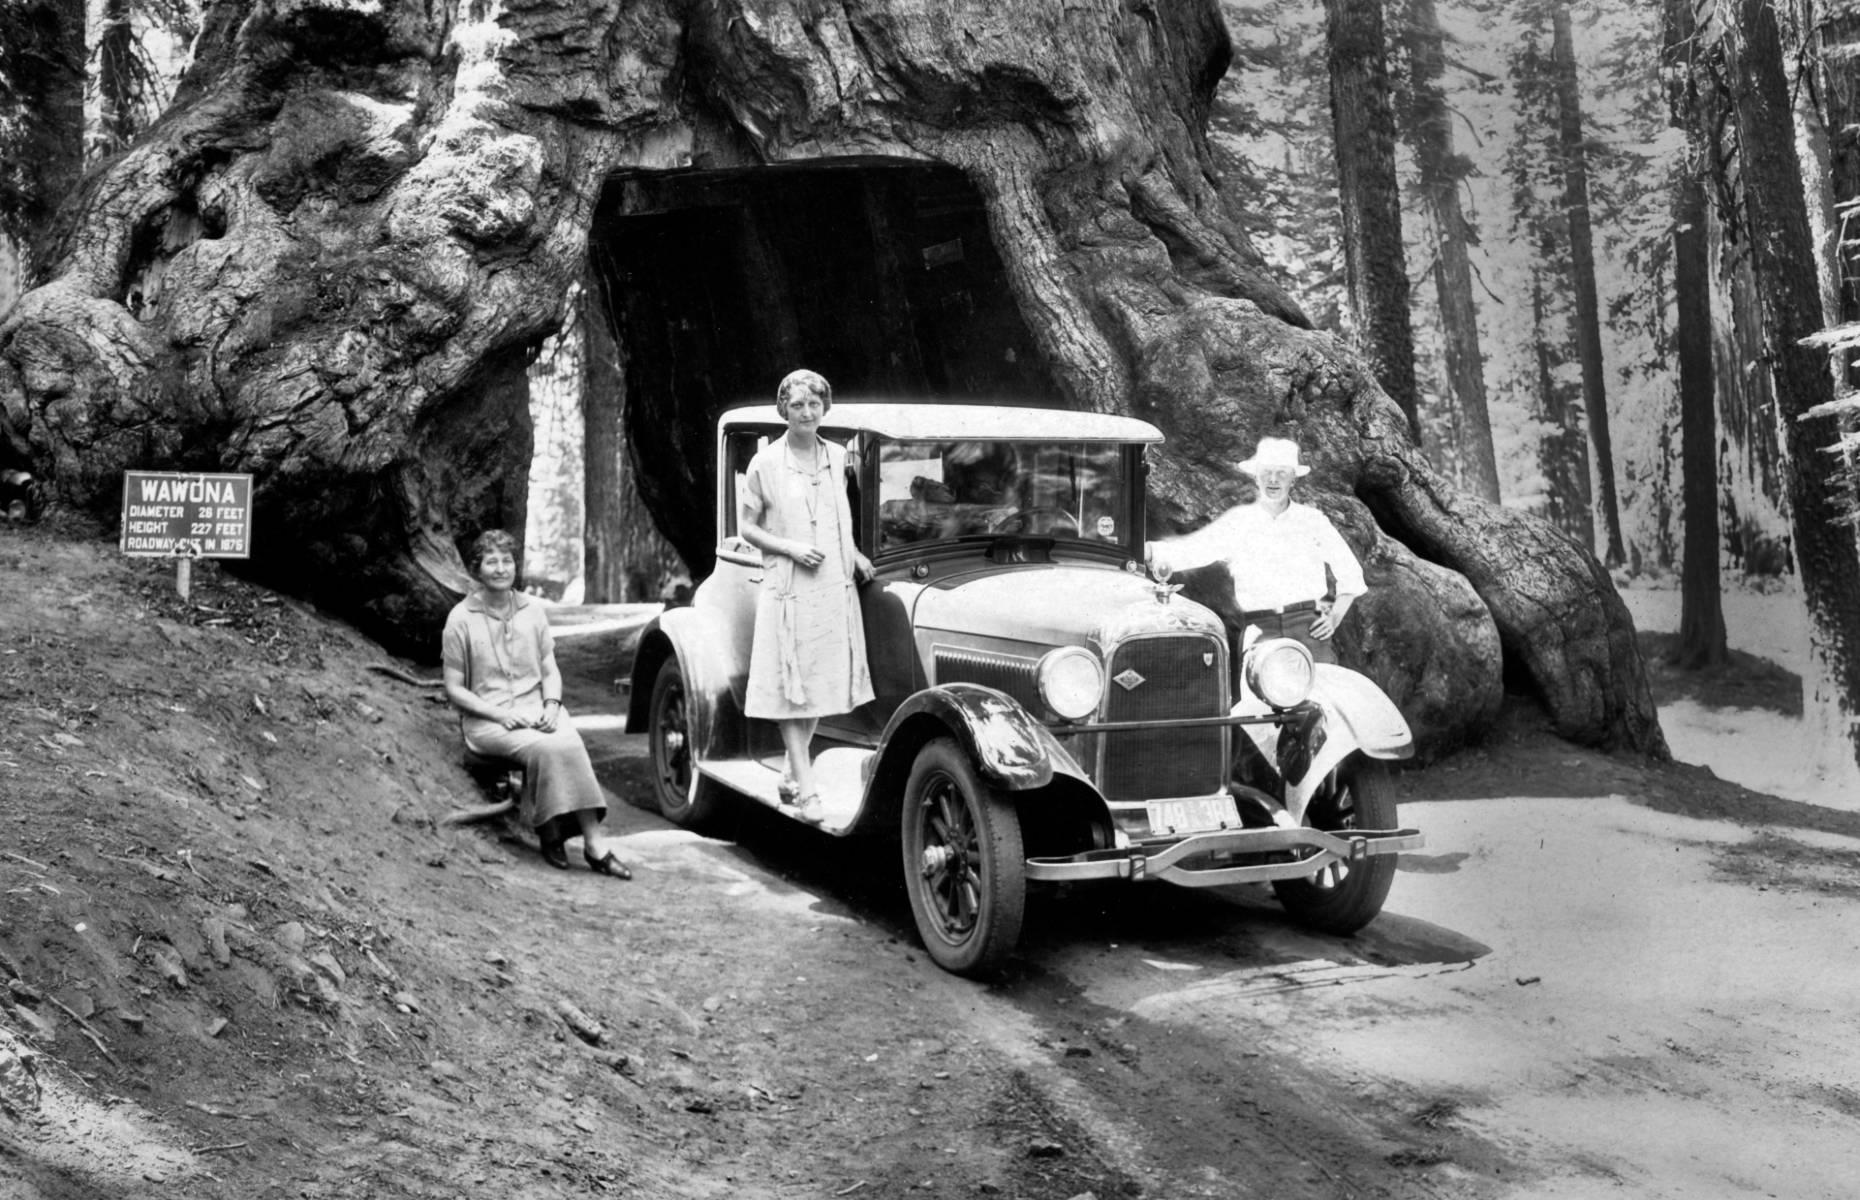 We wouldn’t dream of cutting a hole in a giant sequoia today, but back in 1881 a tunnel big enough to drive through was carved in the towering Wawona Tree in Yosemite National Park. Intended to be a tourist attraction, the 227-foot (69m) tree certainly drew in plenty of early road trippers such as this family. Sadly, the 2,100-year-old beauty fell in 1969, partly due to the fact the tunnel had weakened its base.